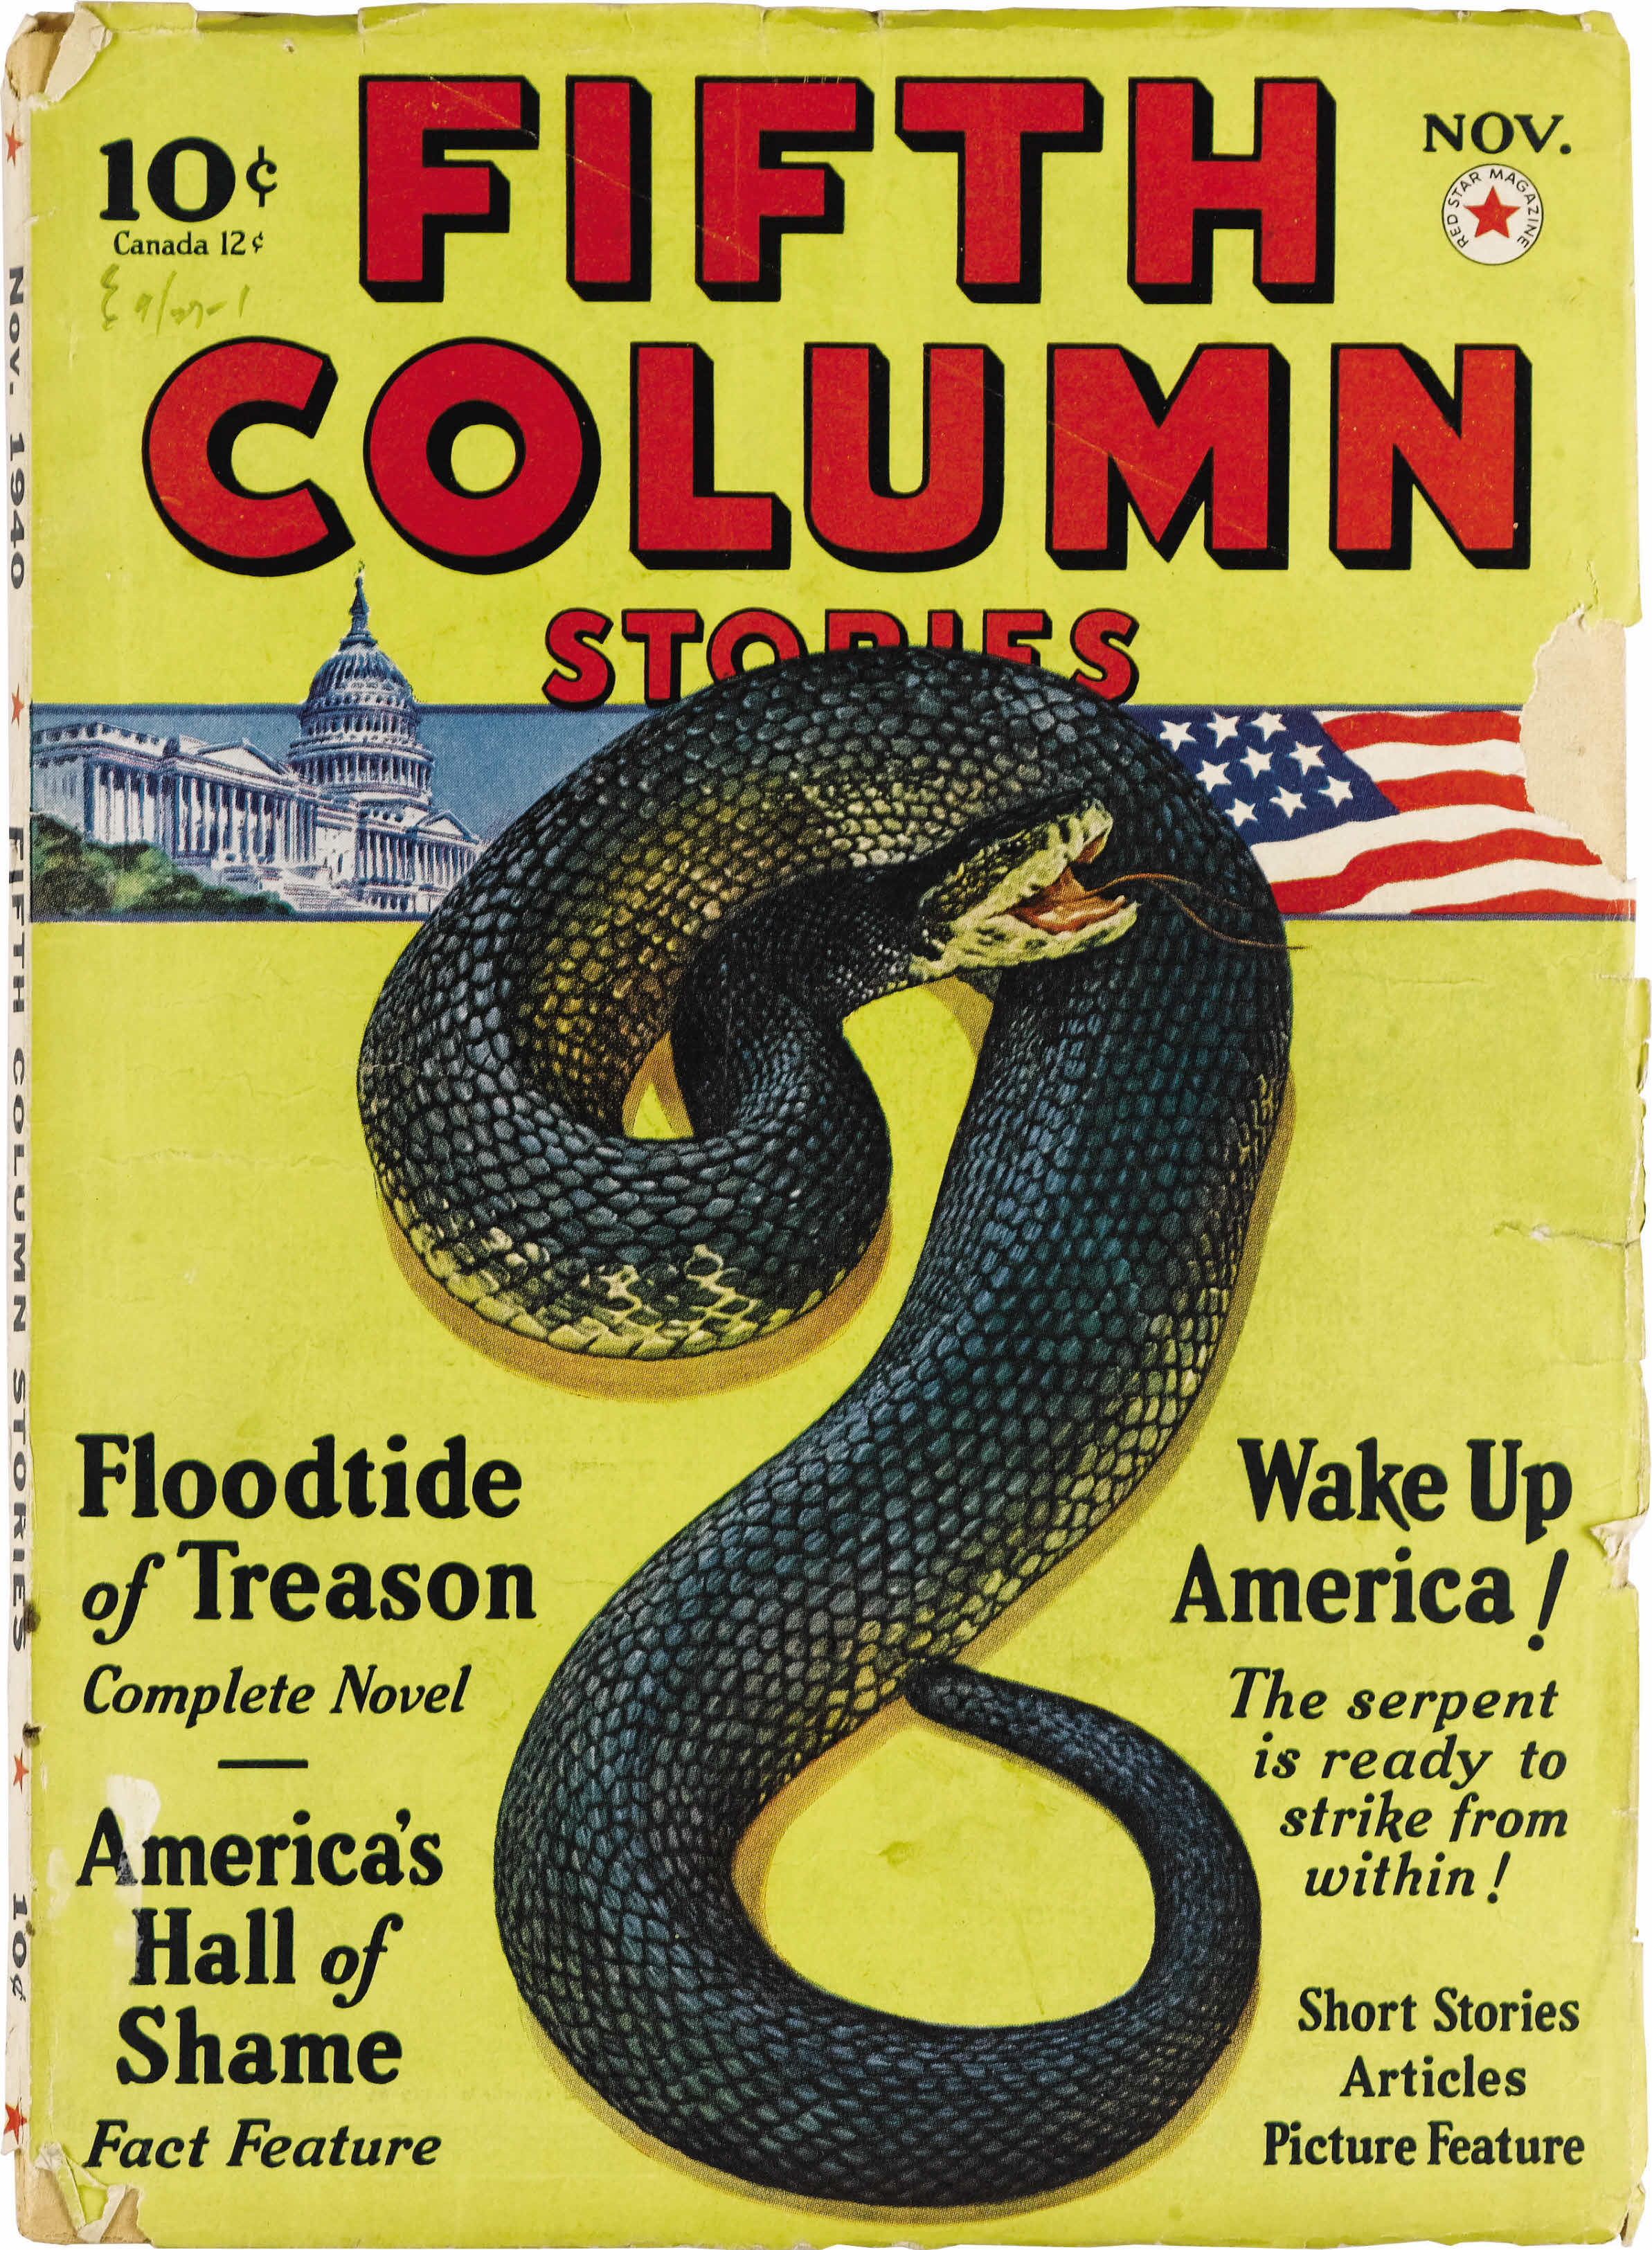 Image result for fifth column